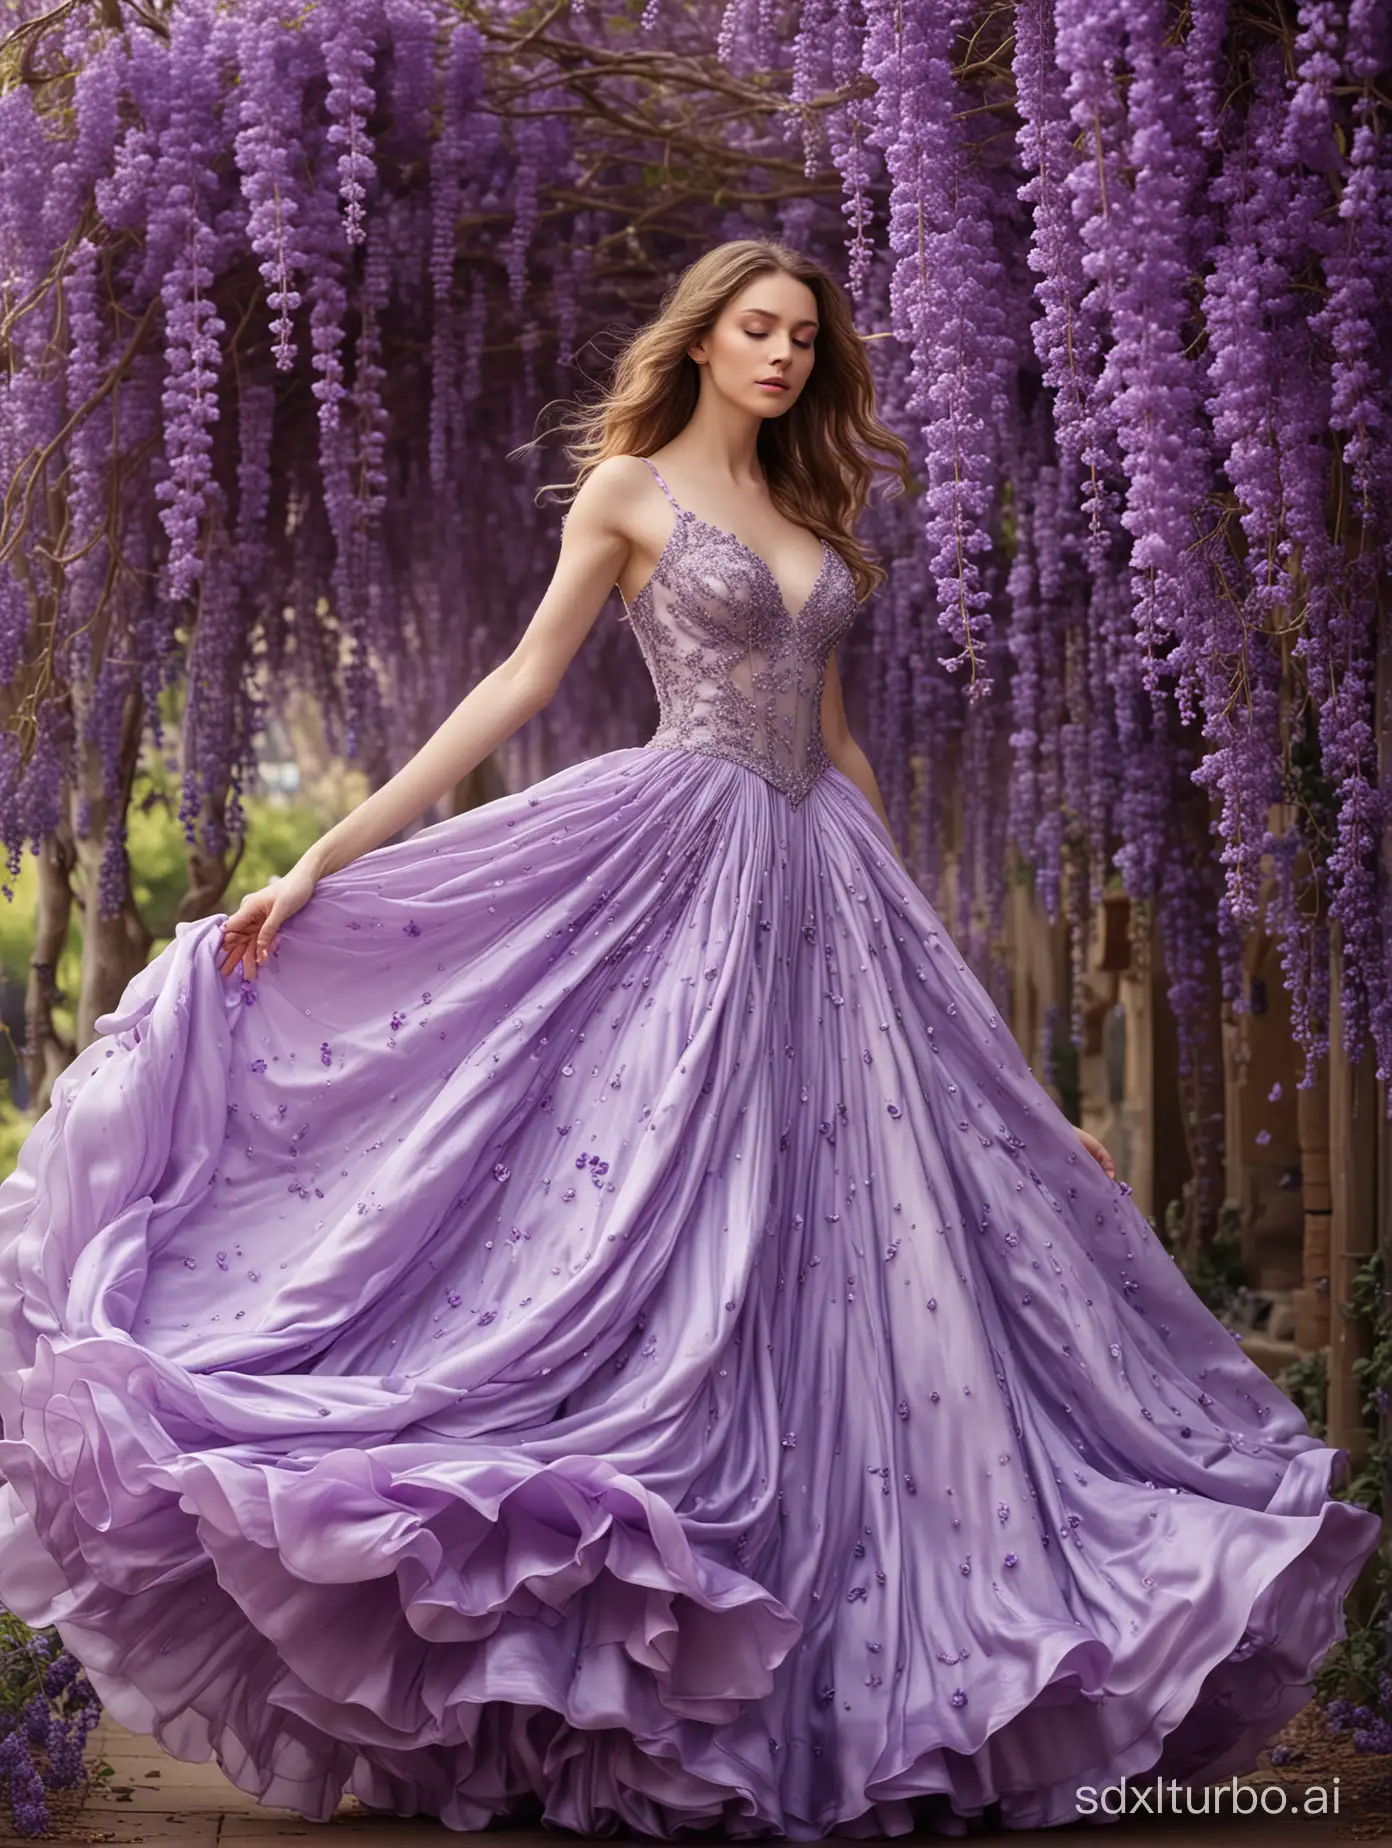 Petals drifting in the air, details, award-winning masterpiece, non-representational, expression of emotions, rich in imagination, highly detailed, highly detailed, a gown formed by the fusion of purple satin and petals, floating in midair, female model in formal lens, lavender, wisteria, violet, blooming flowers and skirt hem